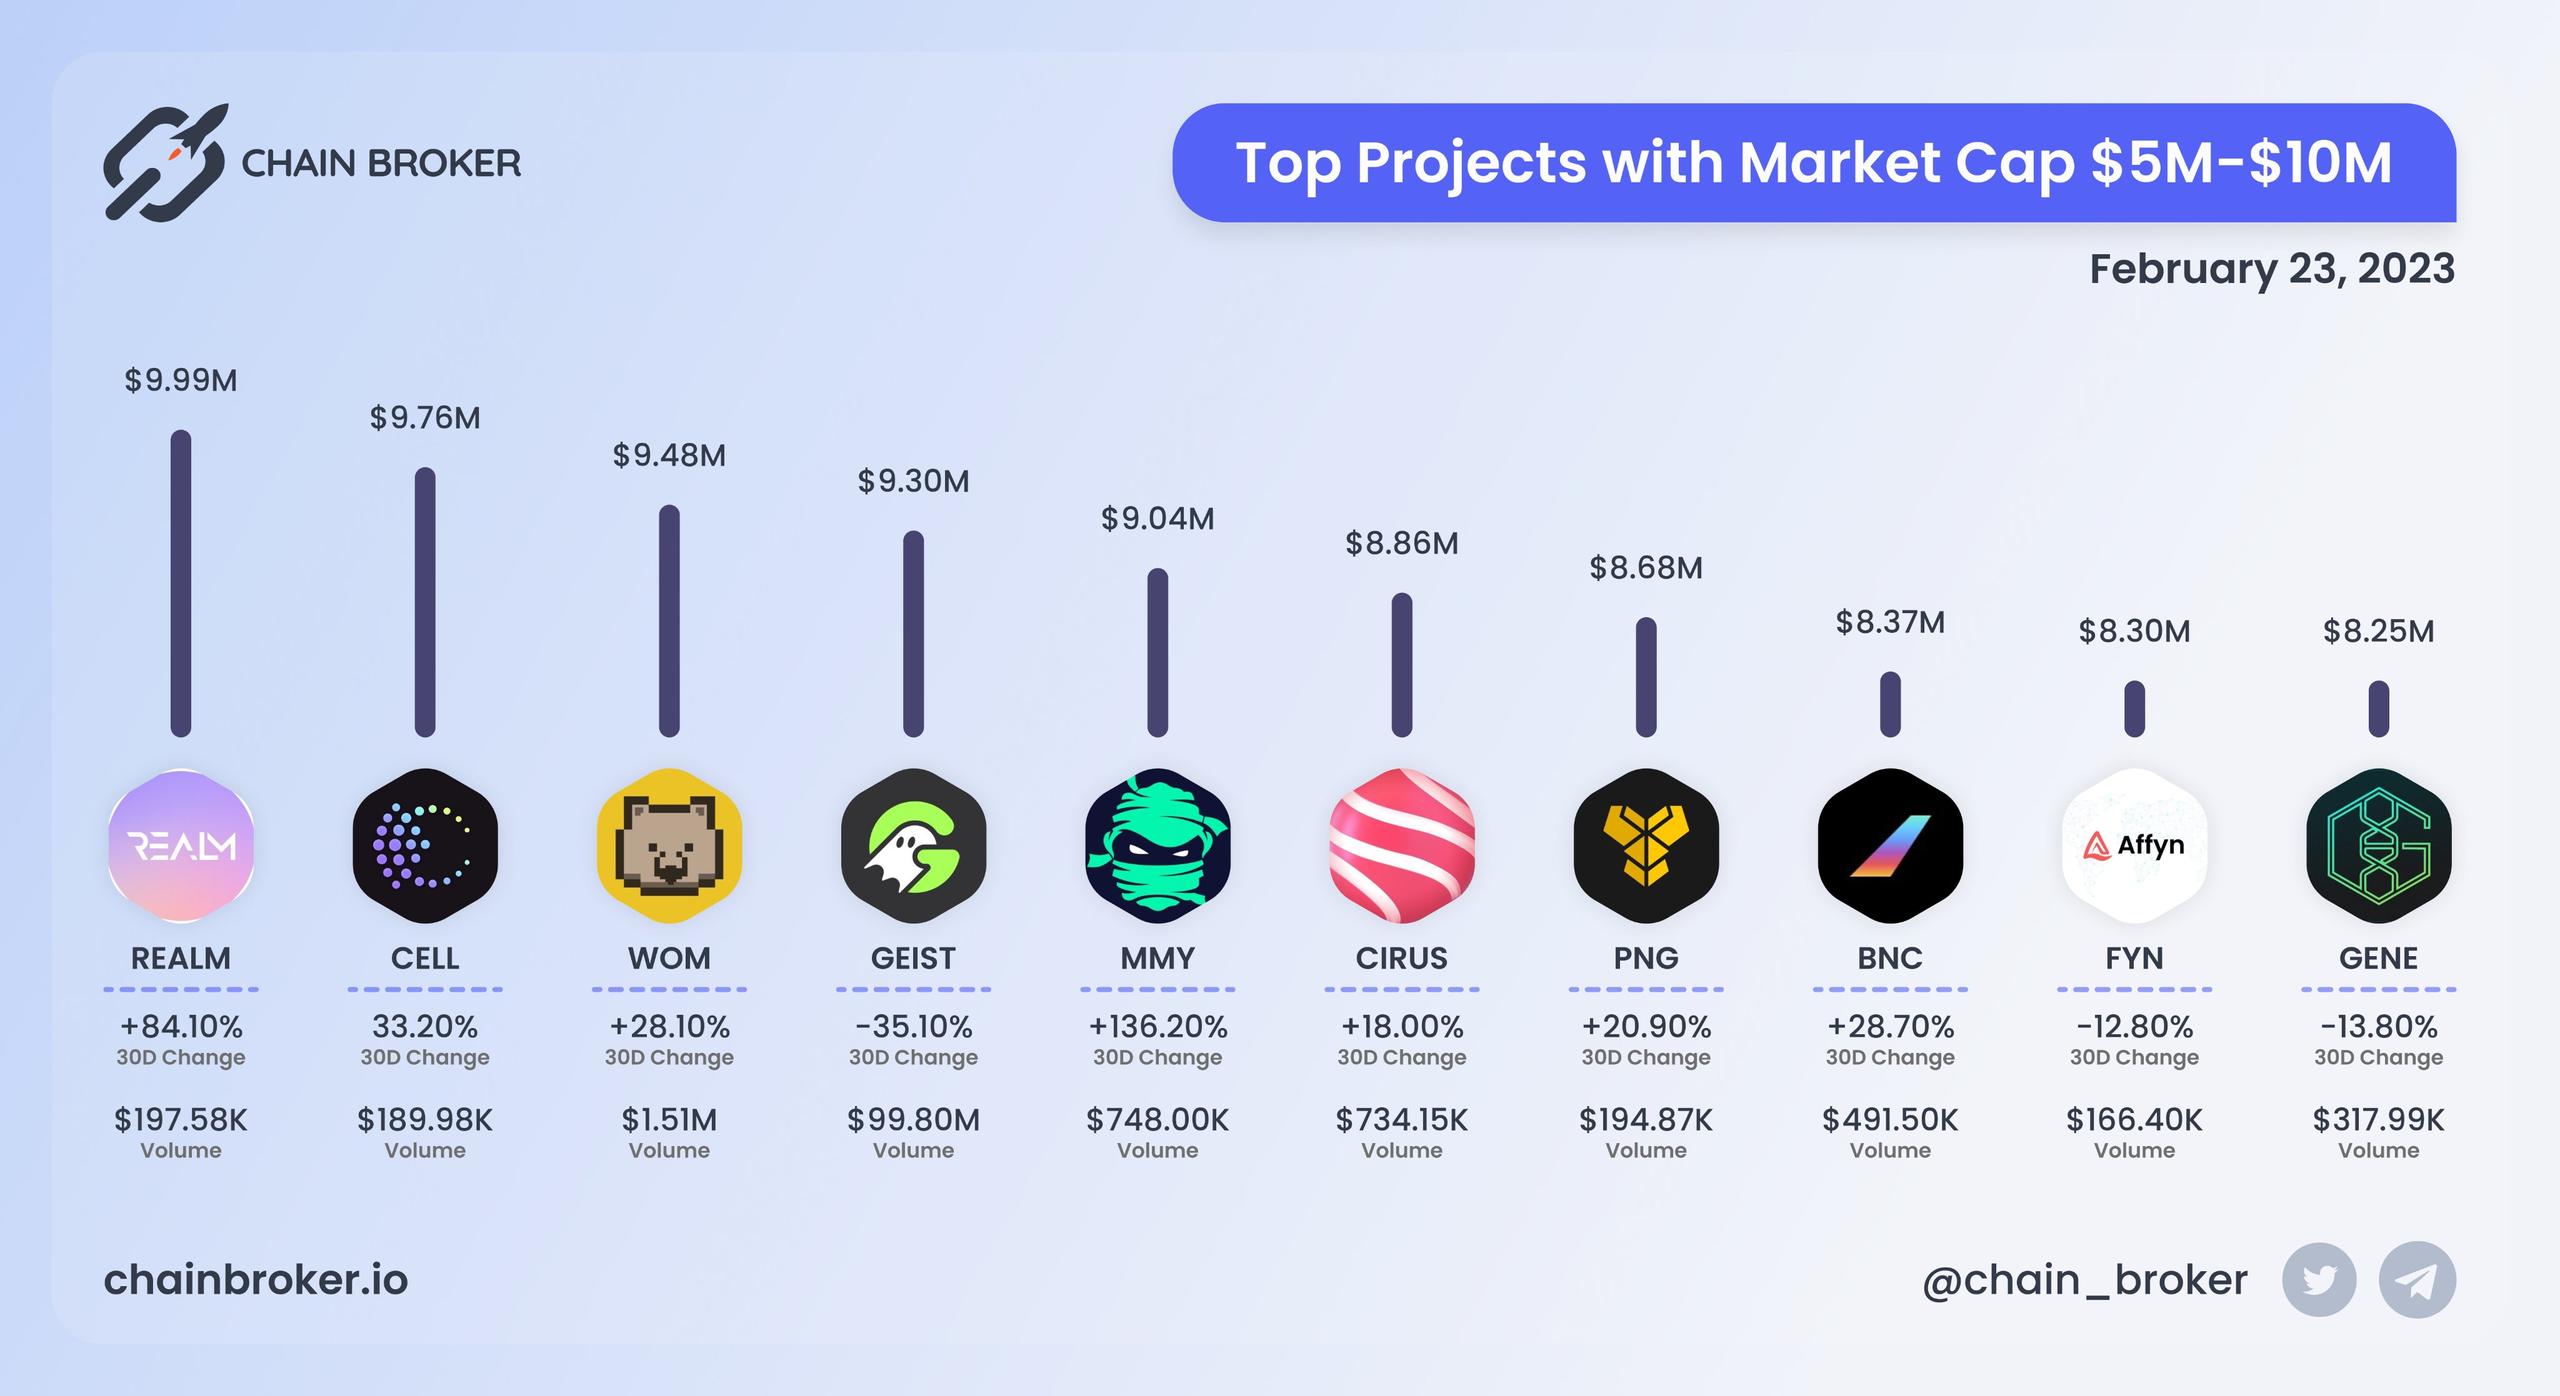 Top projects with Market Cap $5M - $10M